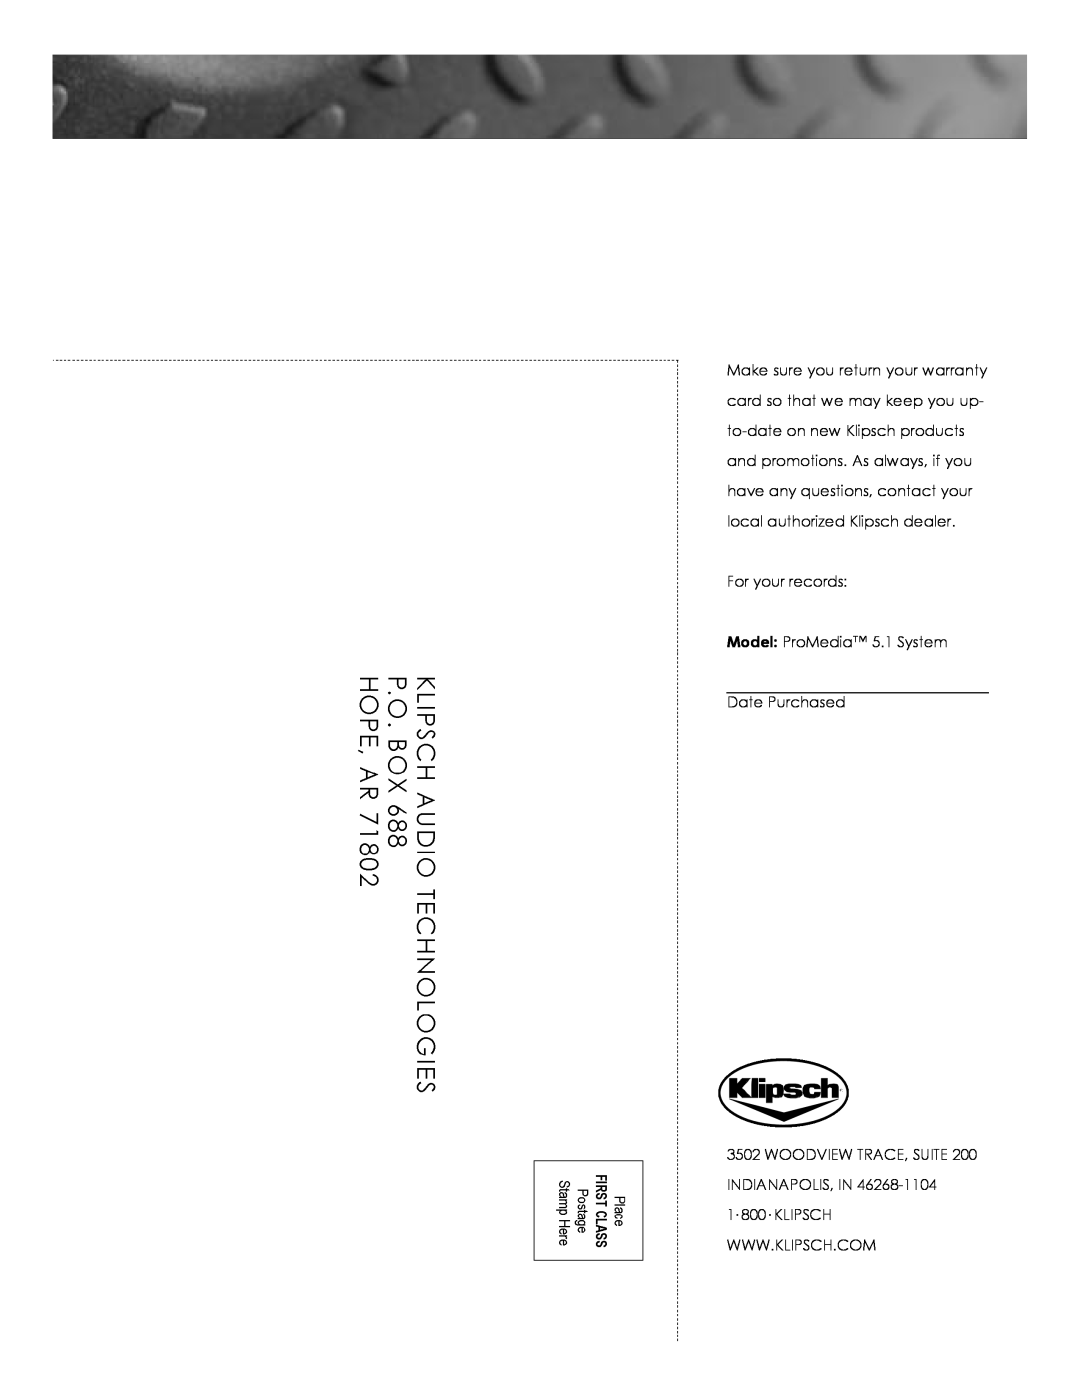 Kitchen Labs ProMediaTM manual For your records Model ProMedia 5.1 System Date Purchased 